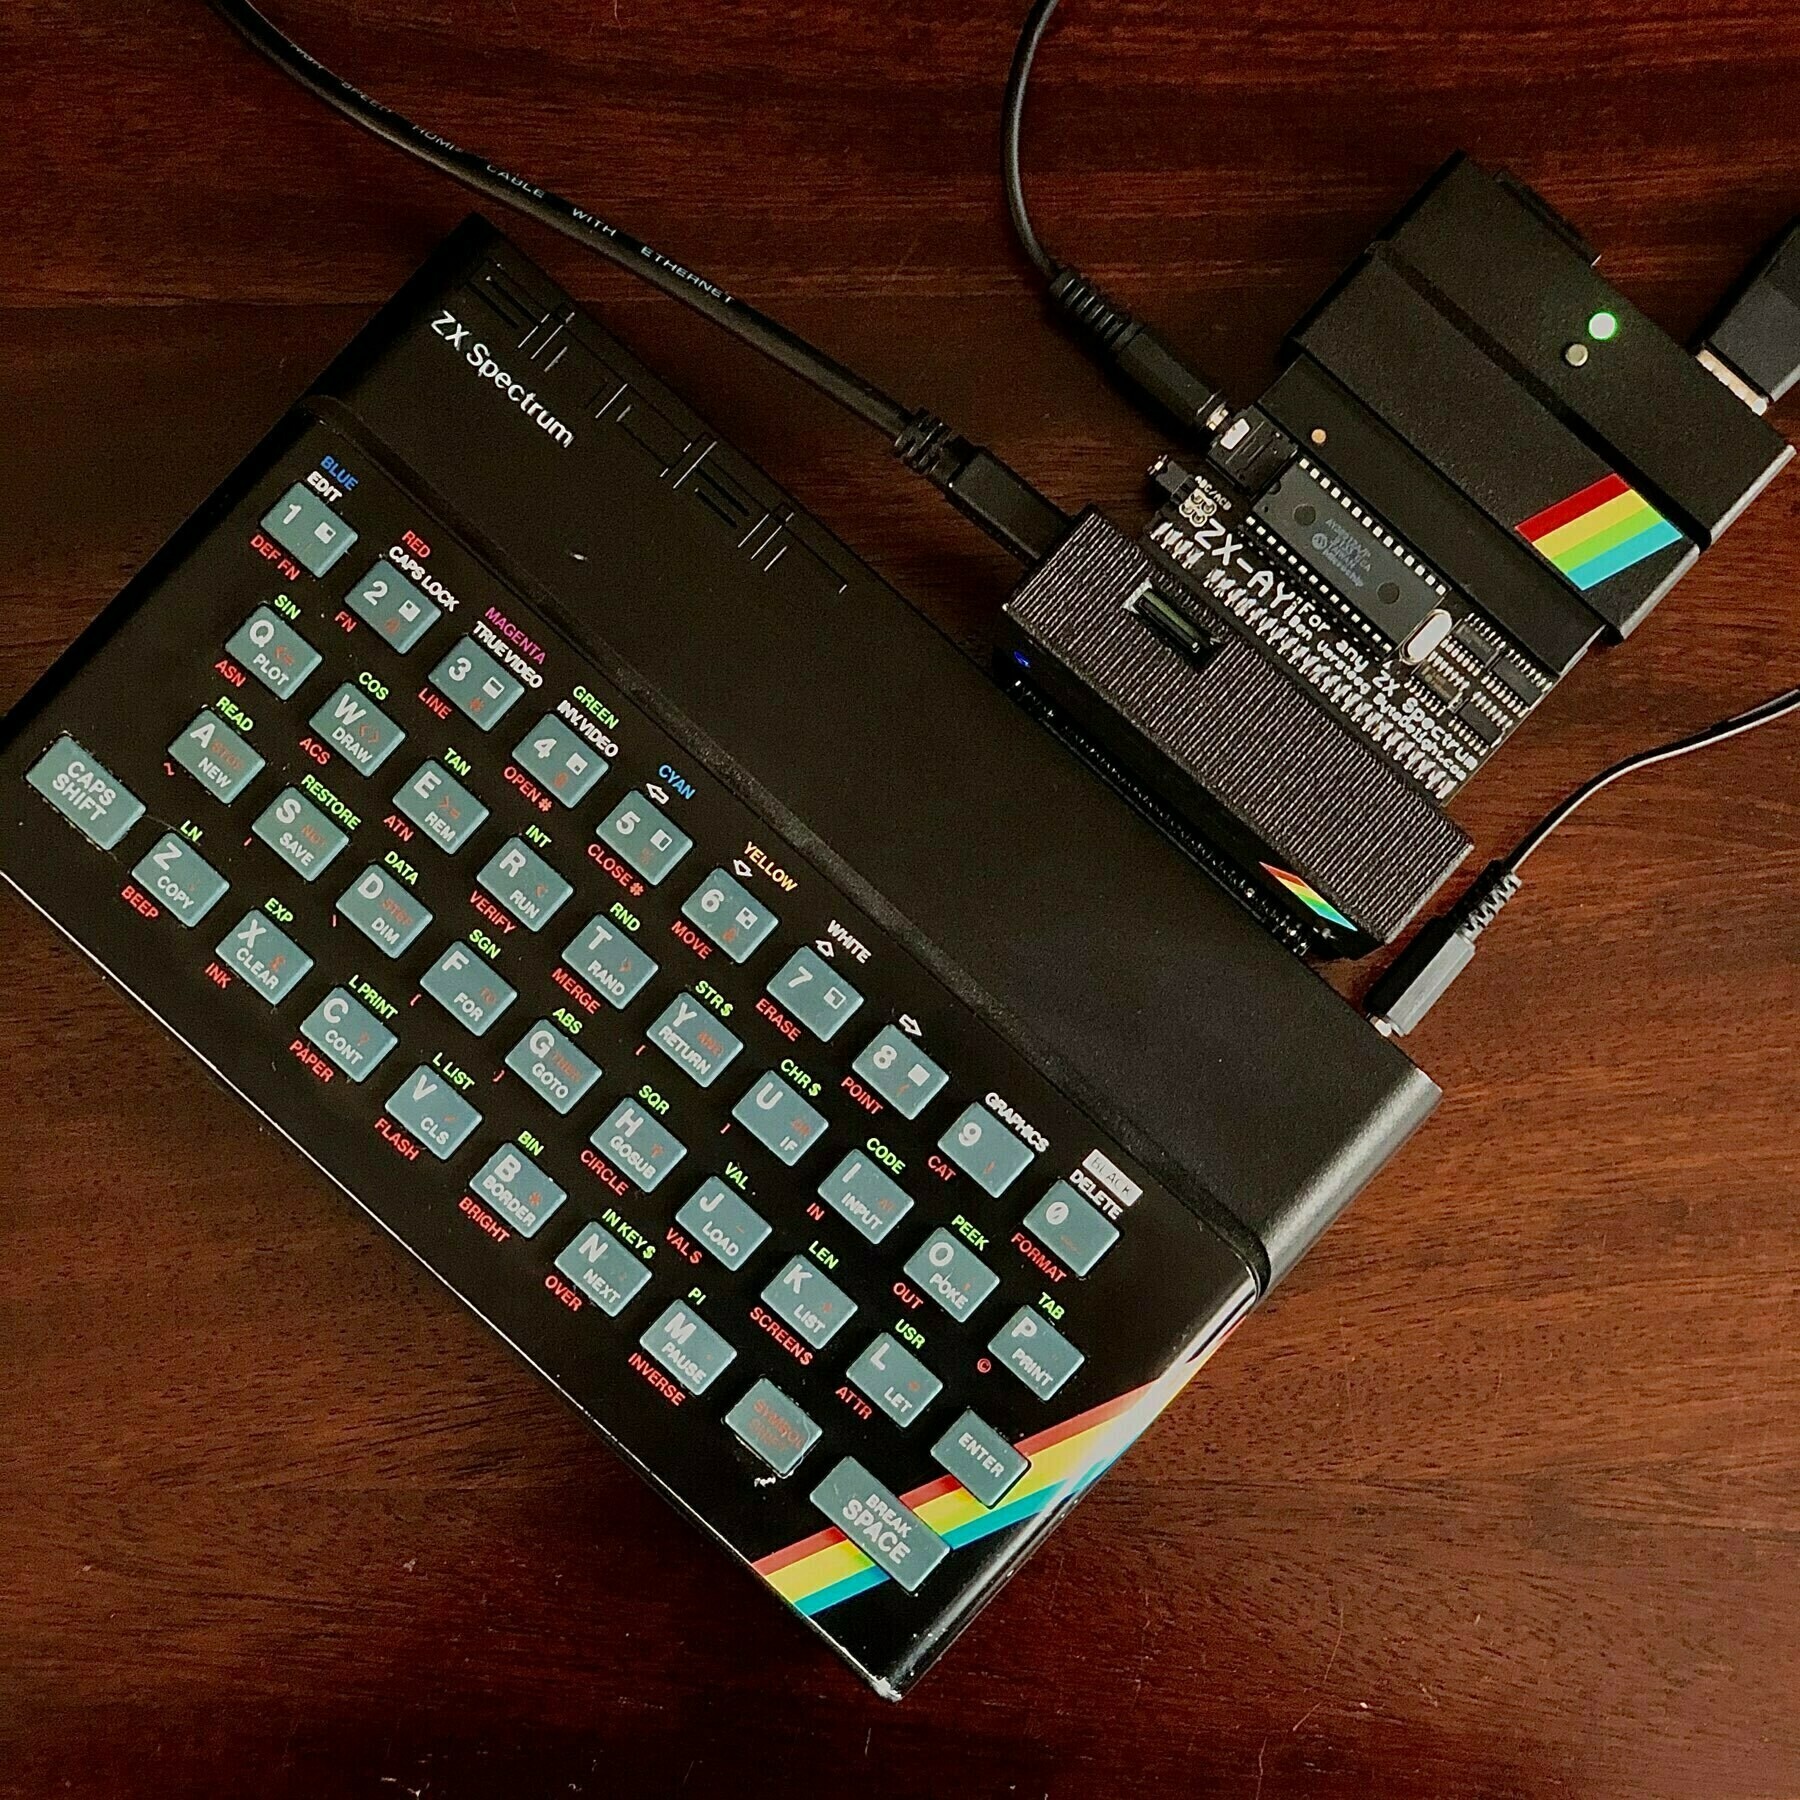 ZX Spectrum 48K with ZX-HD, ZX-AY, and DivMMC Future